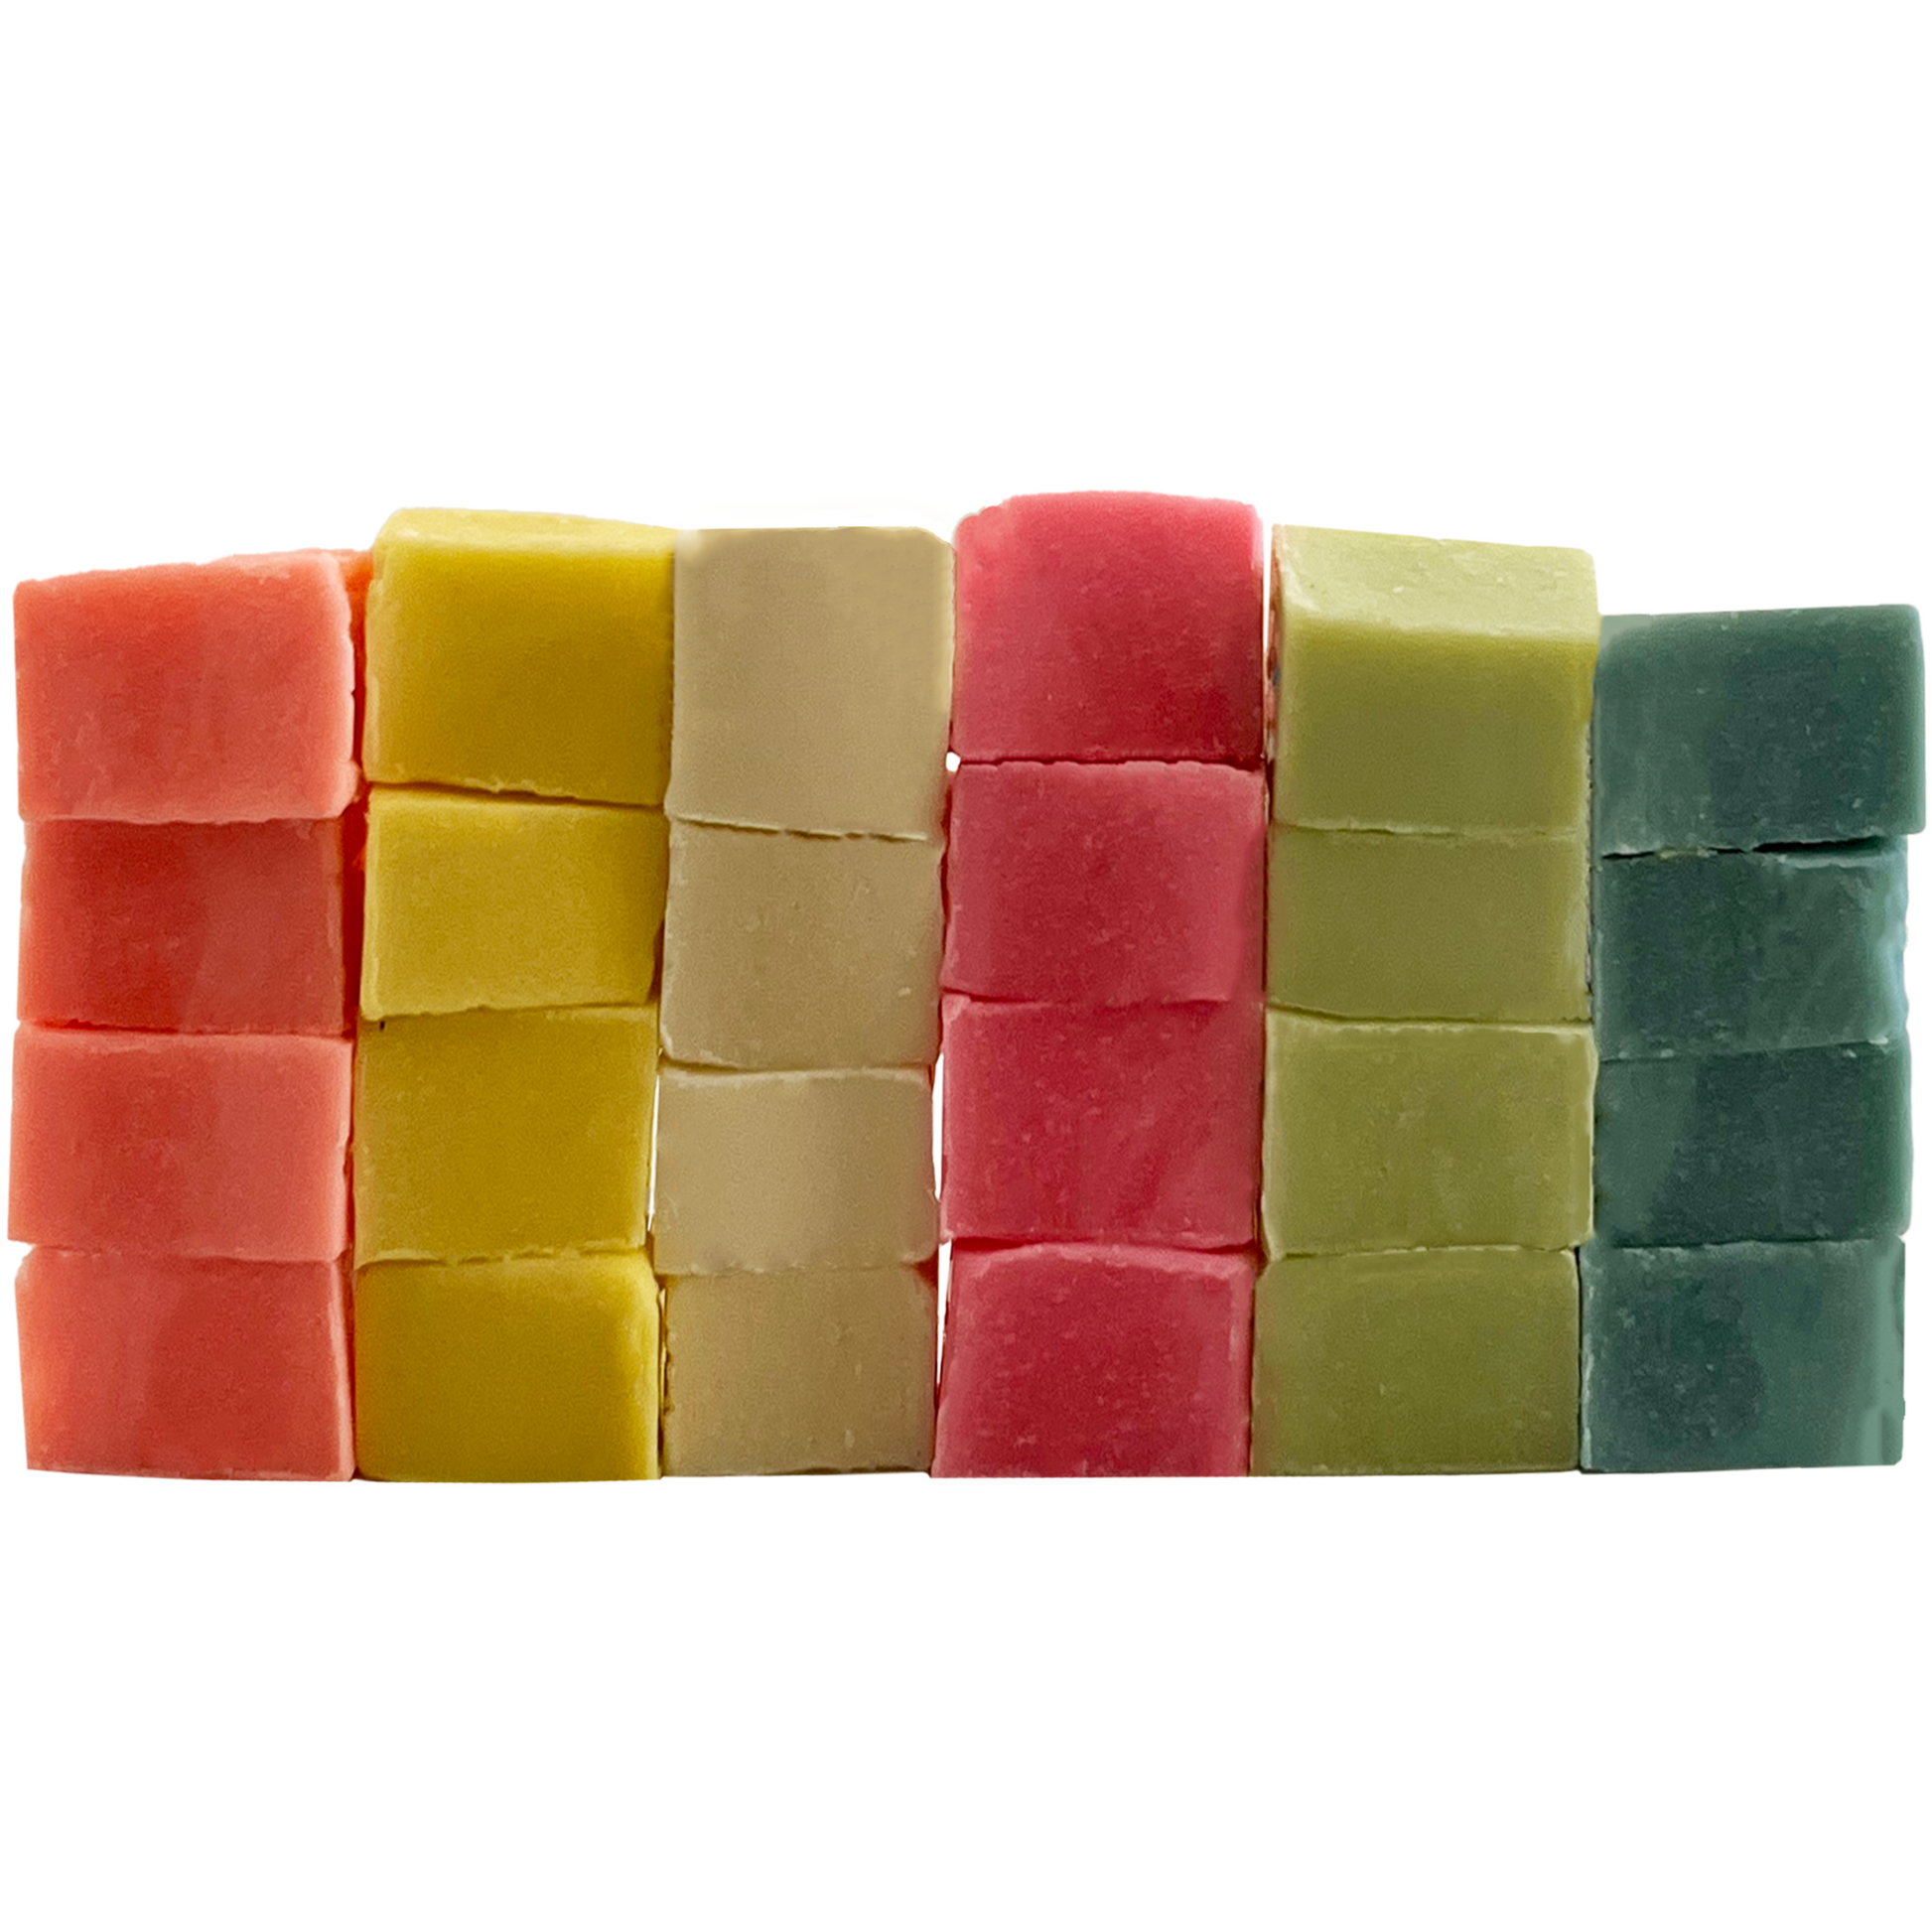 Soap Dough Co. - Pastel Kit - Wall of pastel colors (pink, yellow, white, orange, green, and blue) stacked.